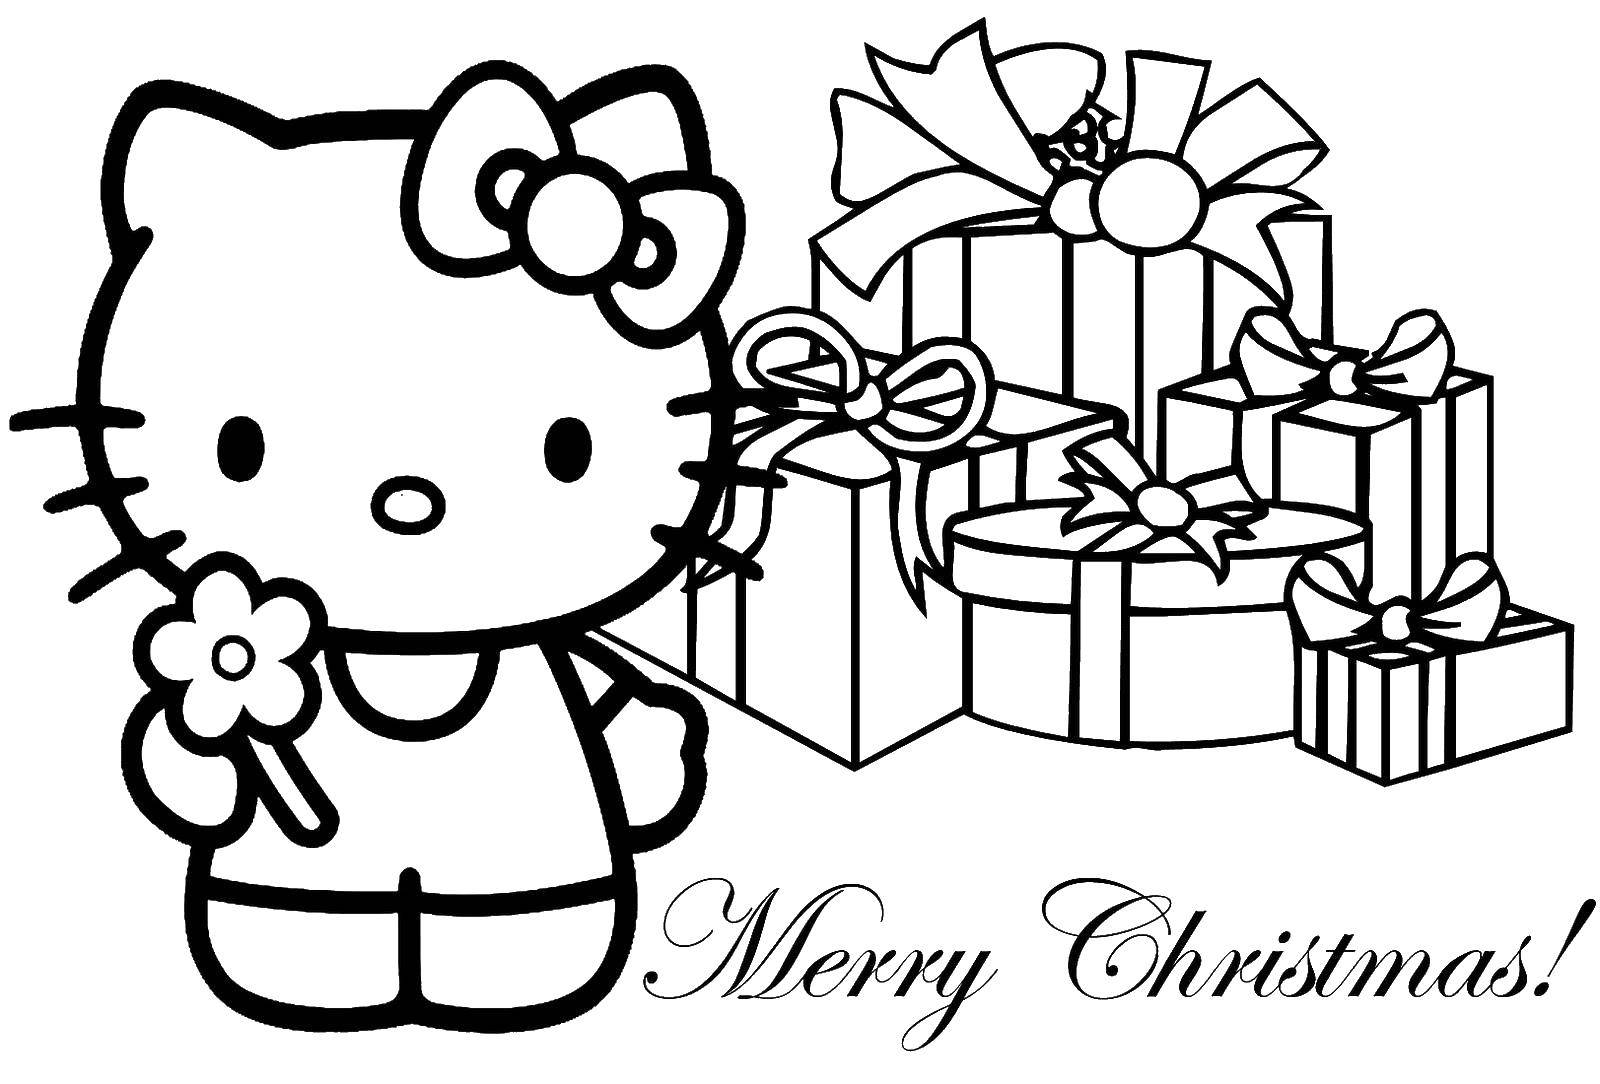 Coloring Merry Christmas!. Category Christmas. Tags:  Christmas, gifts.